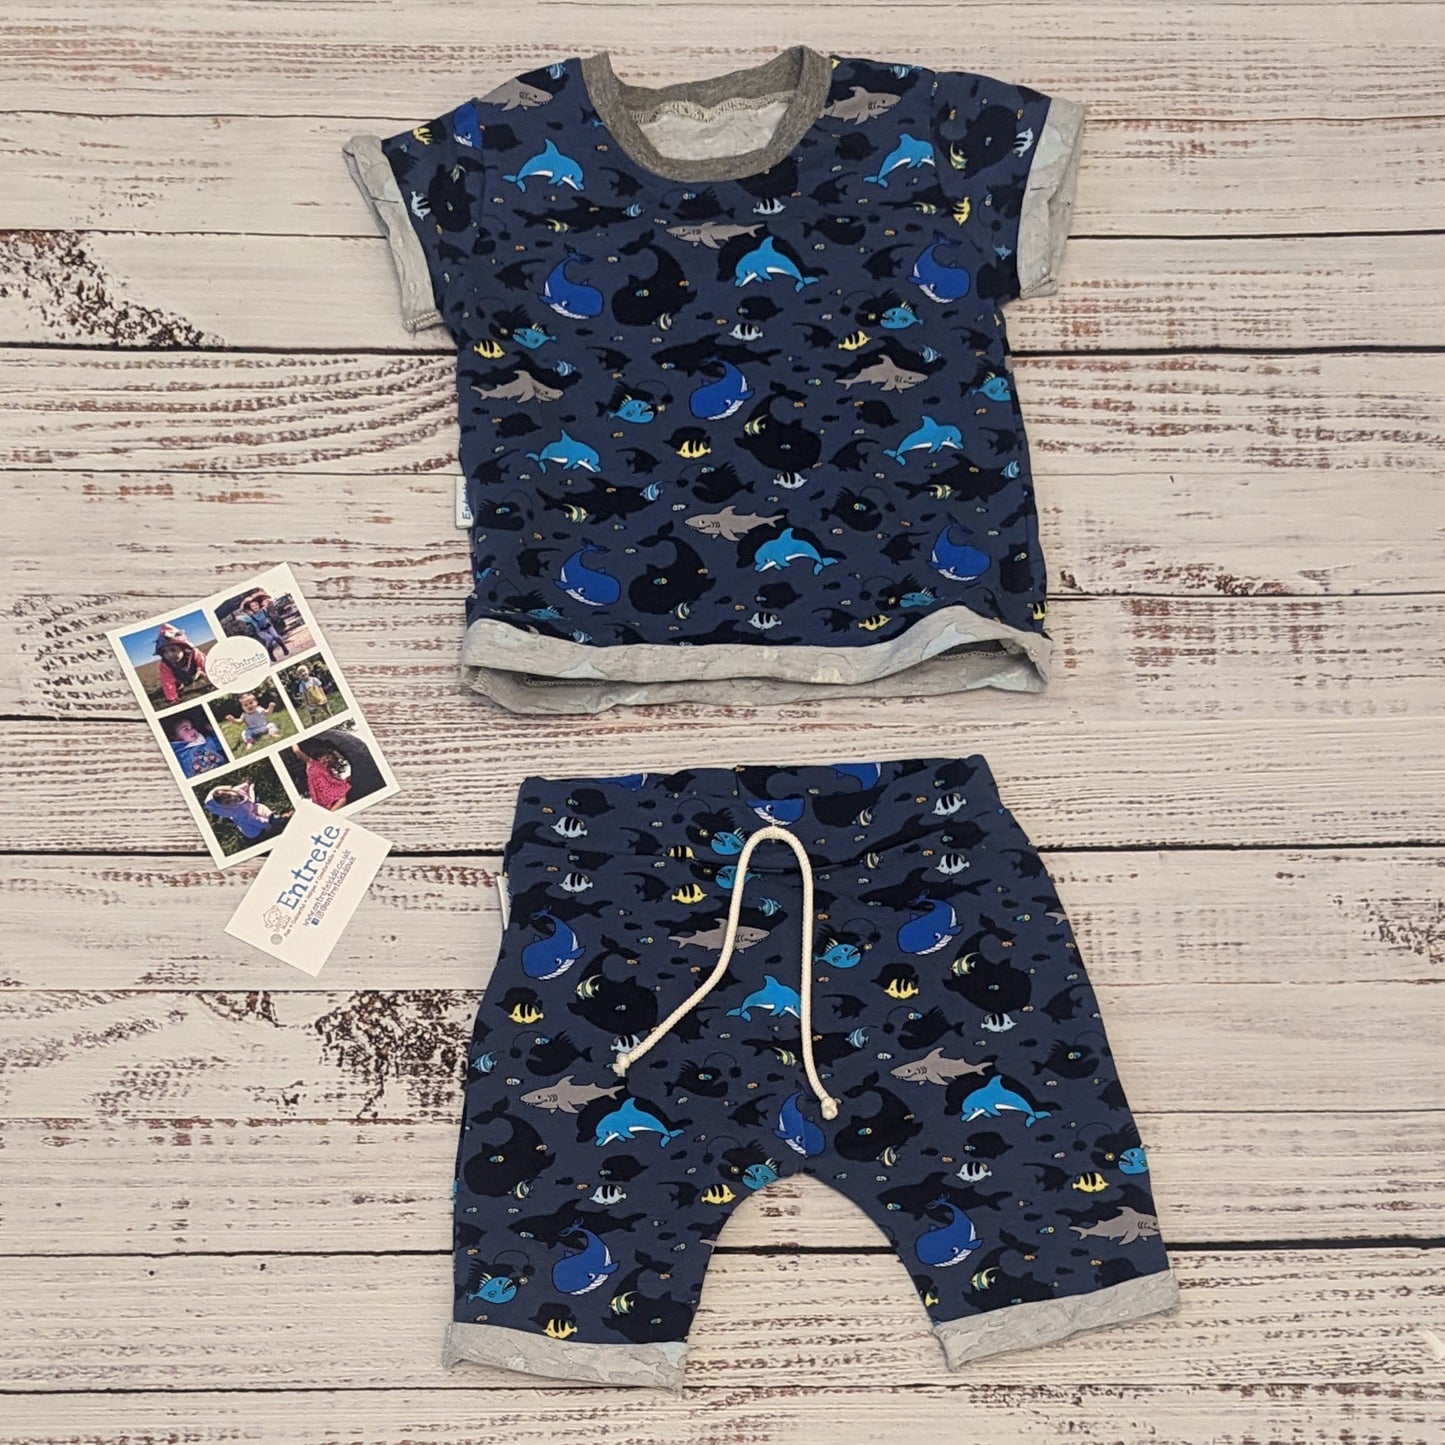 Kids sea creatures harem shorts. Handmade using navy sea life shadows cotton jersey. Shown as an outfit with a matching short sleeve T-shirt.